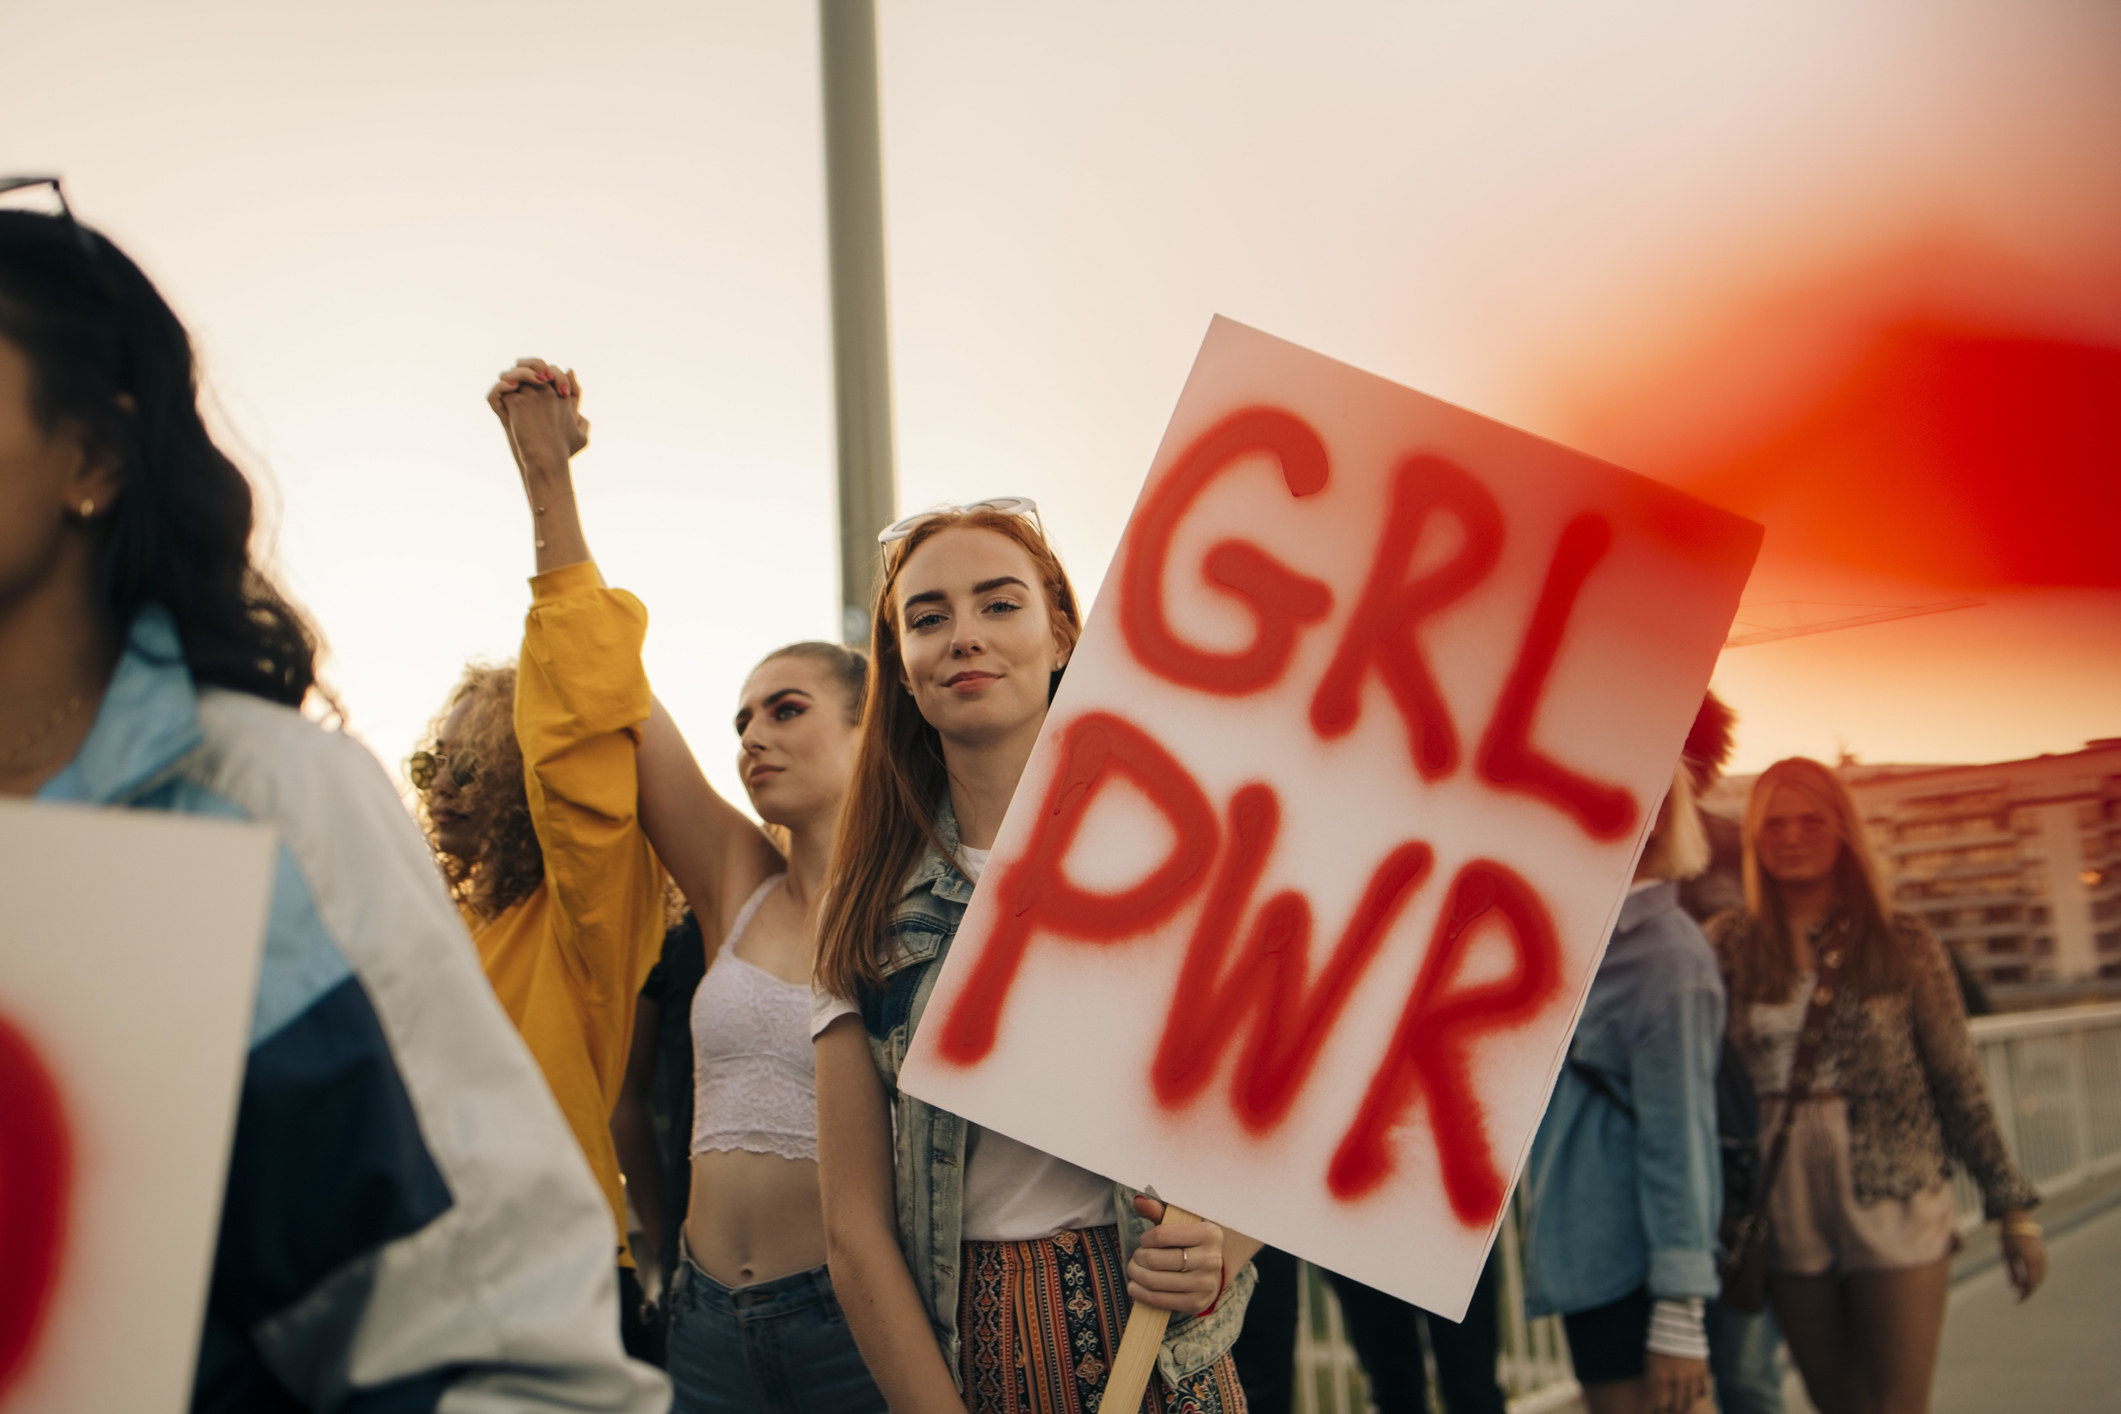 Group of empowered women holding a GRL PWR sign